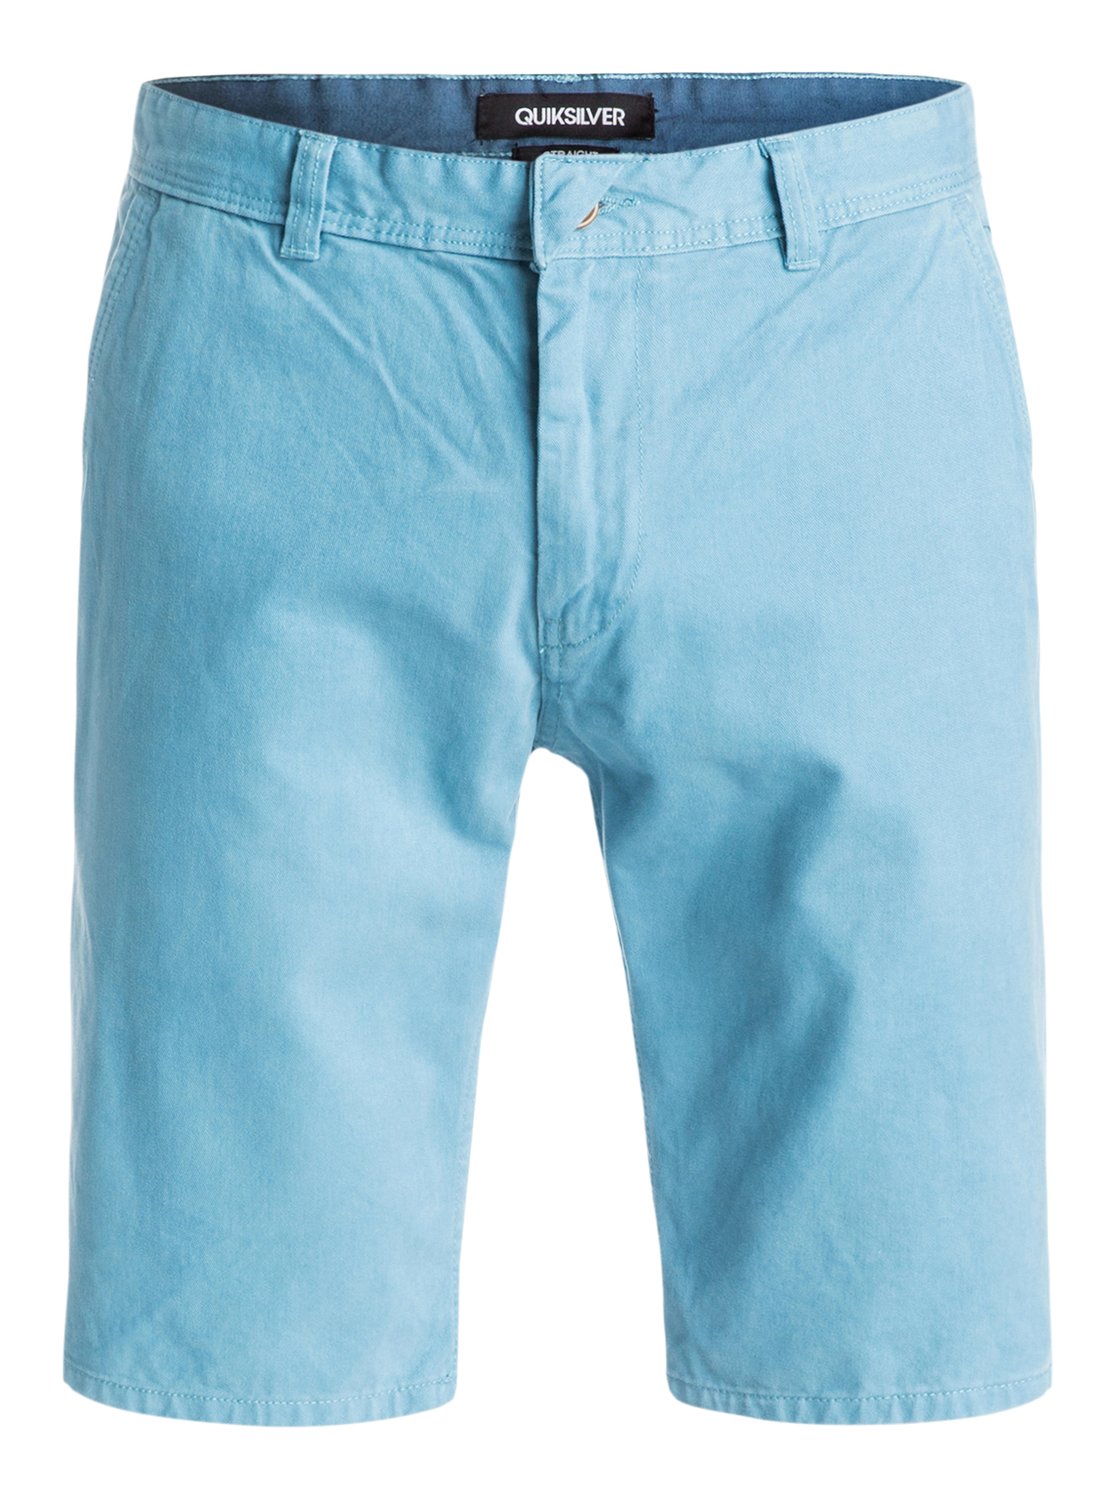 Everyday Chino - Shorts - Quiksilver<br>